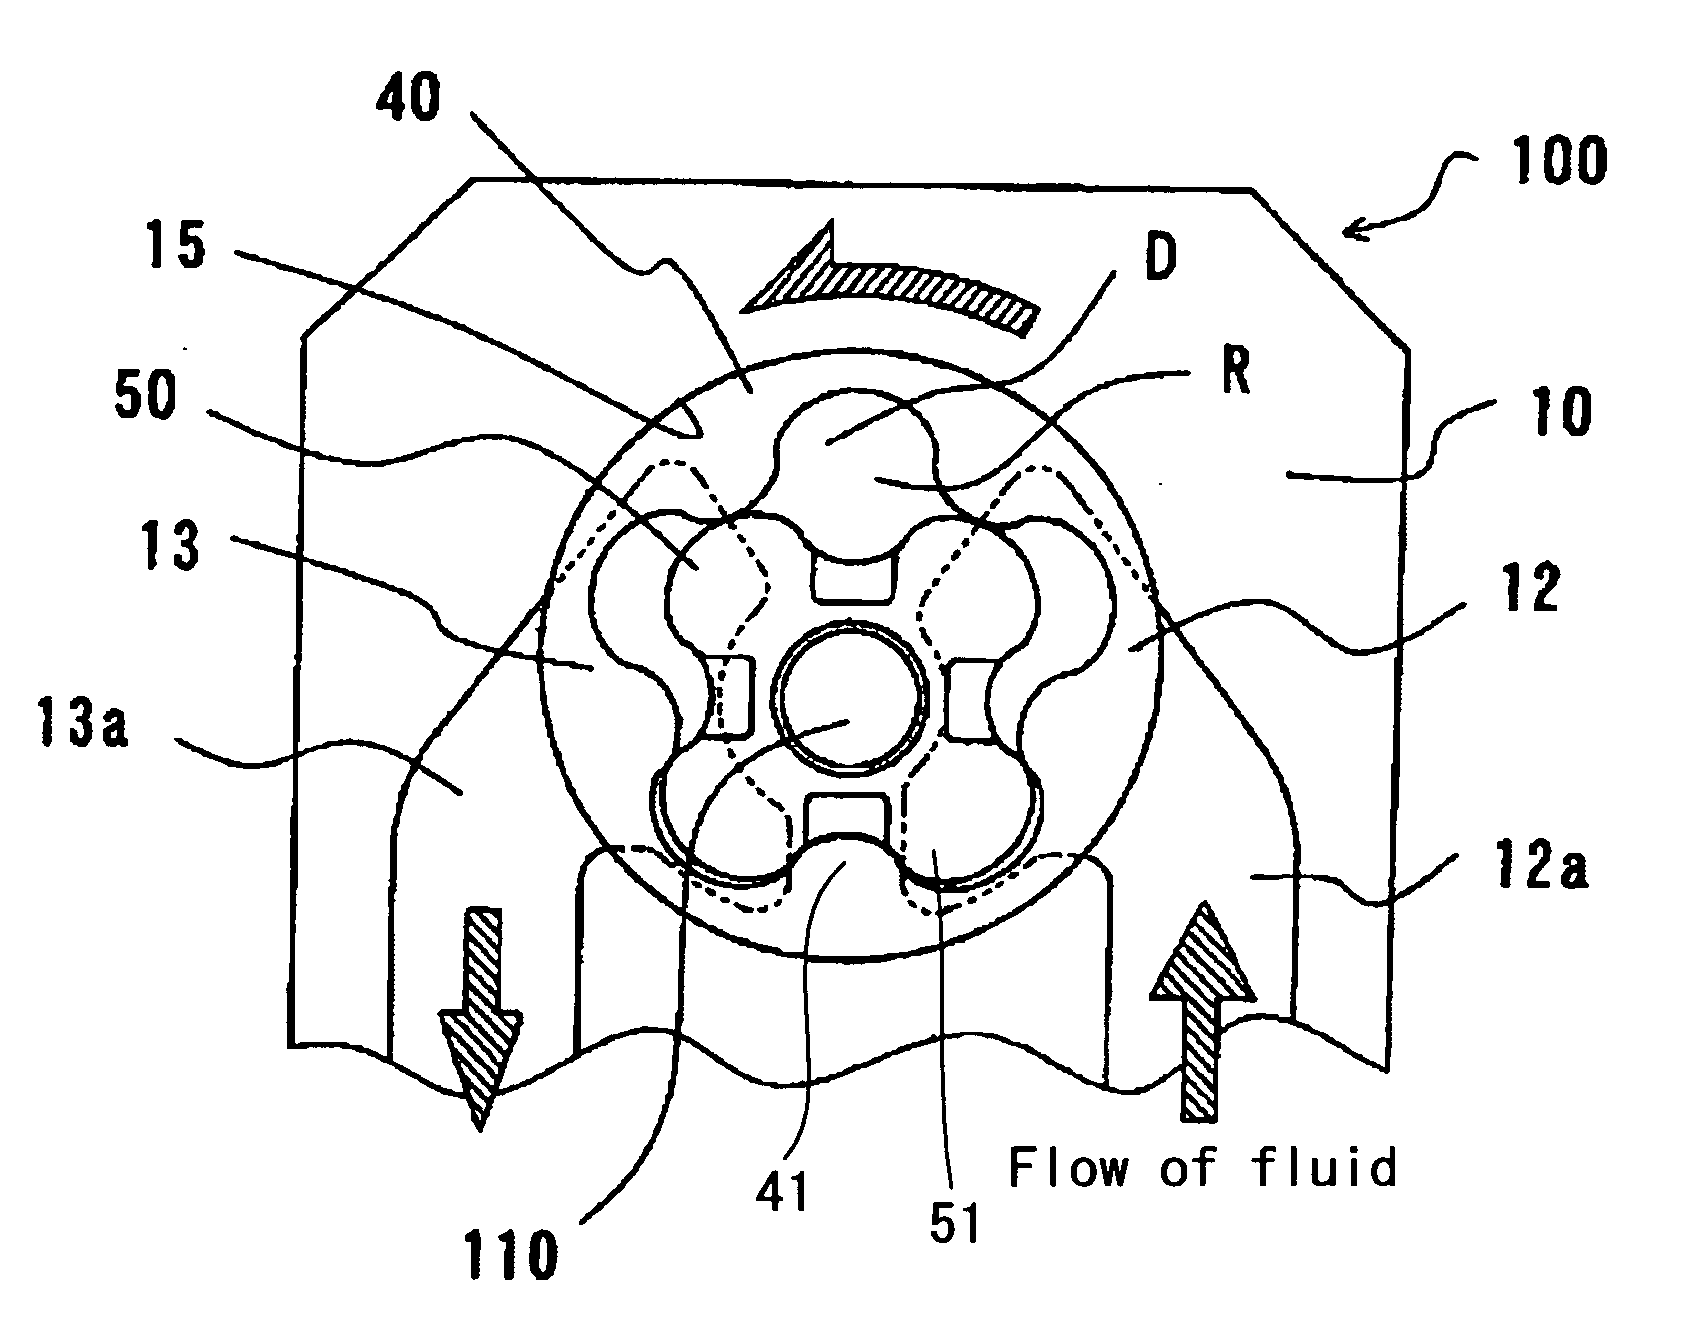 Rotor structure of inscribed gear pump